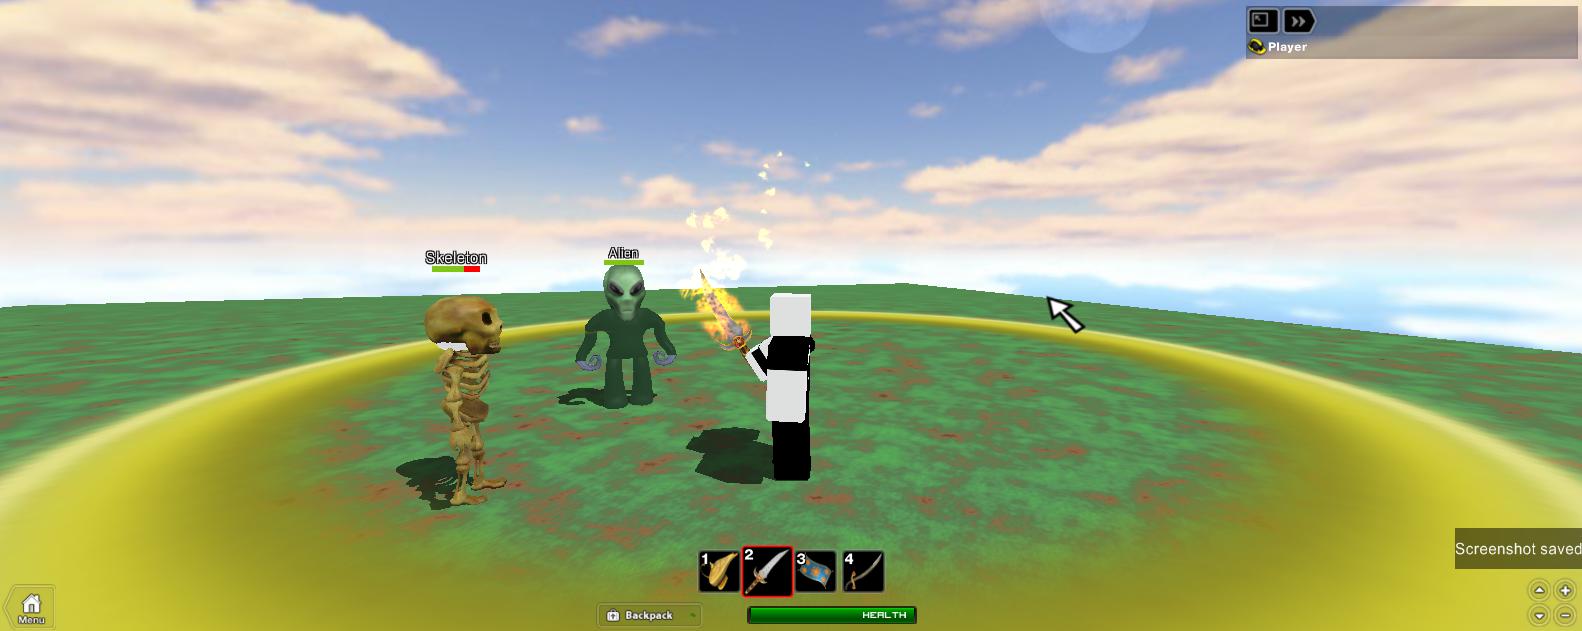 Tech Note Scripted Tools And Weapons Roblox Blog - roblox weapons special effects